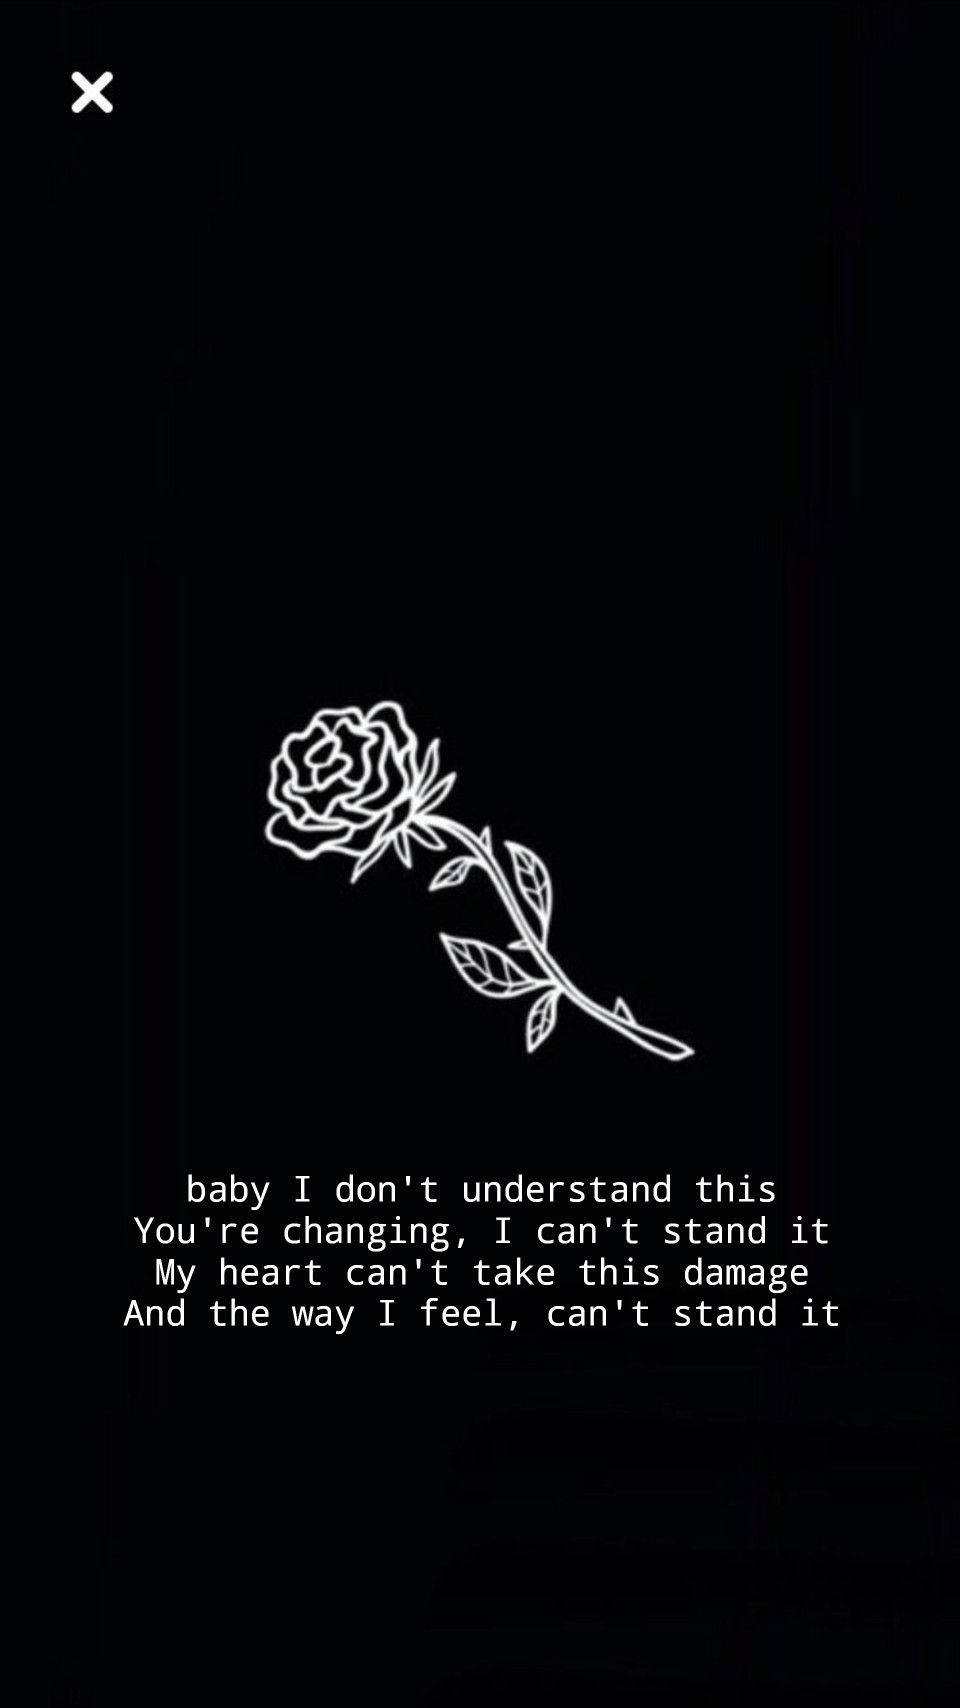 A Black And White Image Of A Rose With The Words'i Don't Understand' Wallpaper